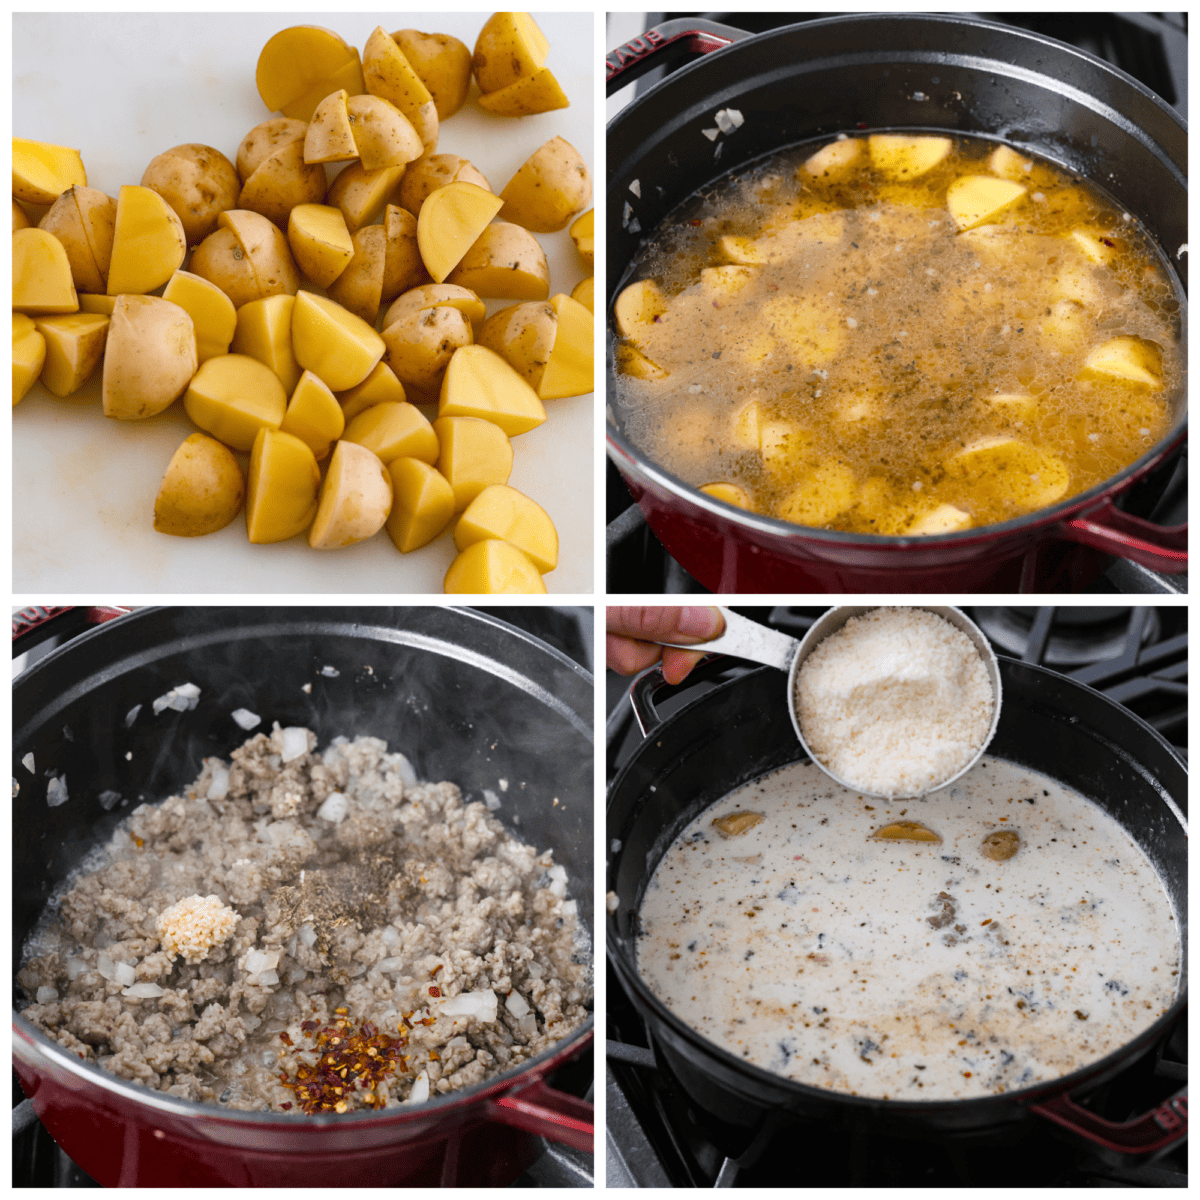 4-photo collage of the creamy sausage and potato soup being prepared.